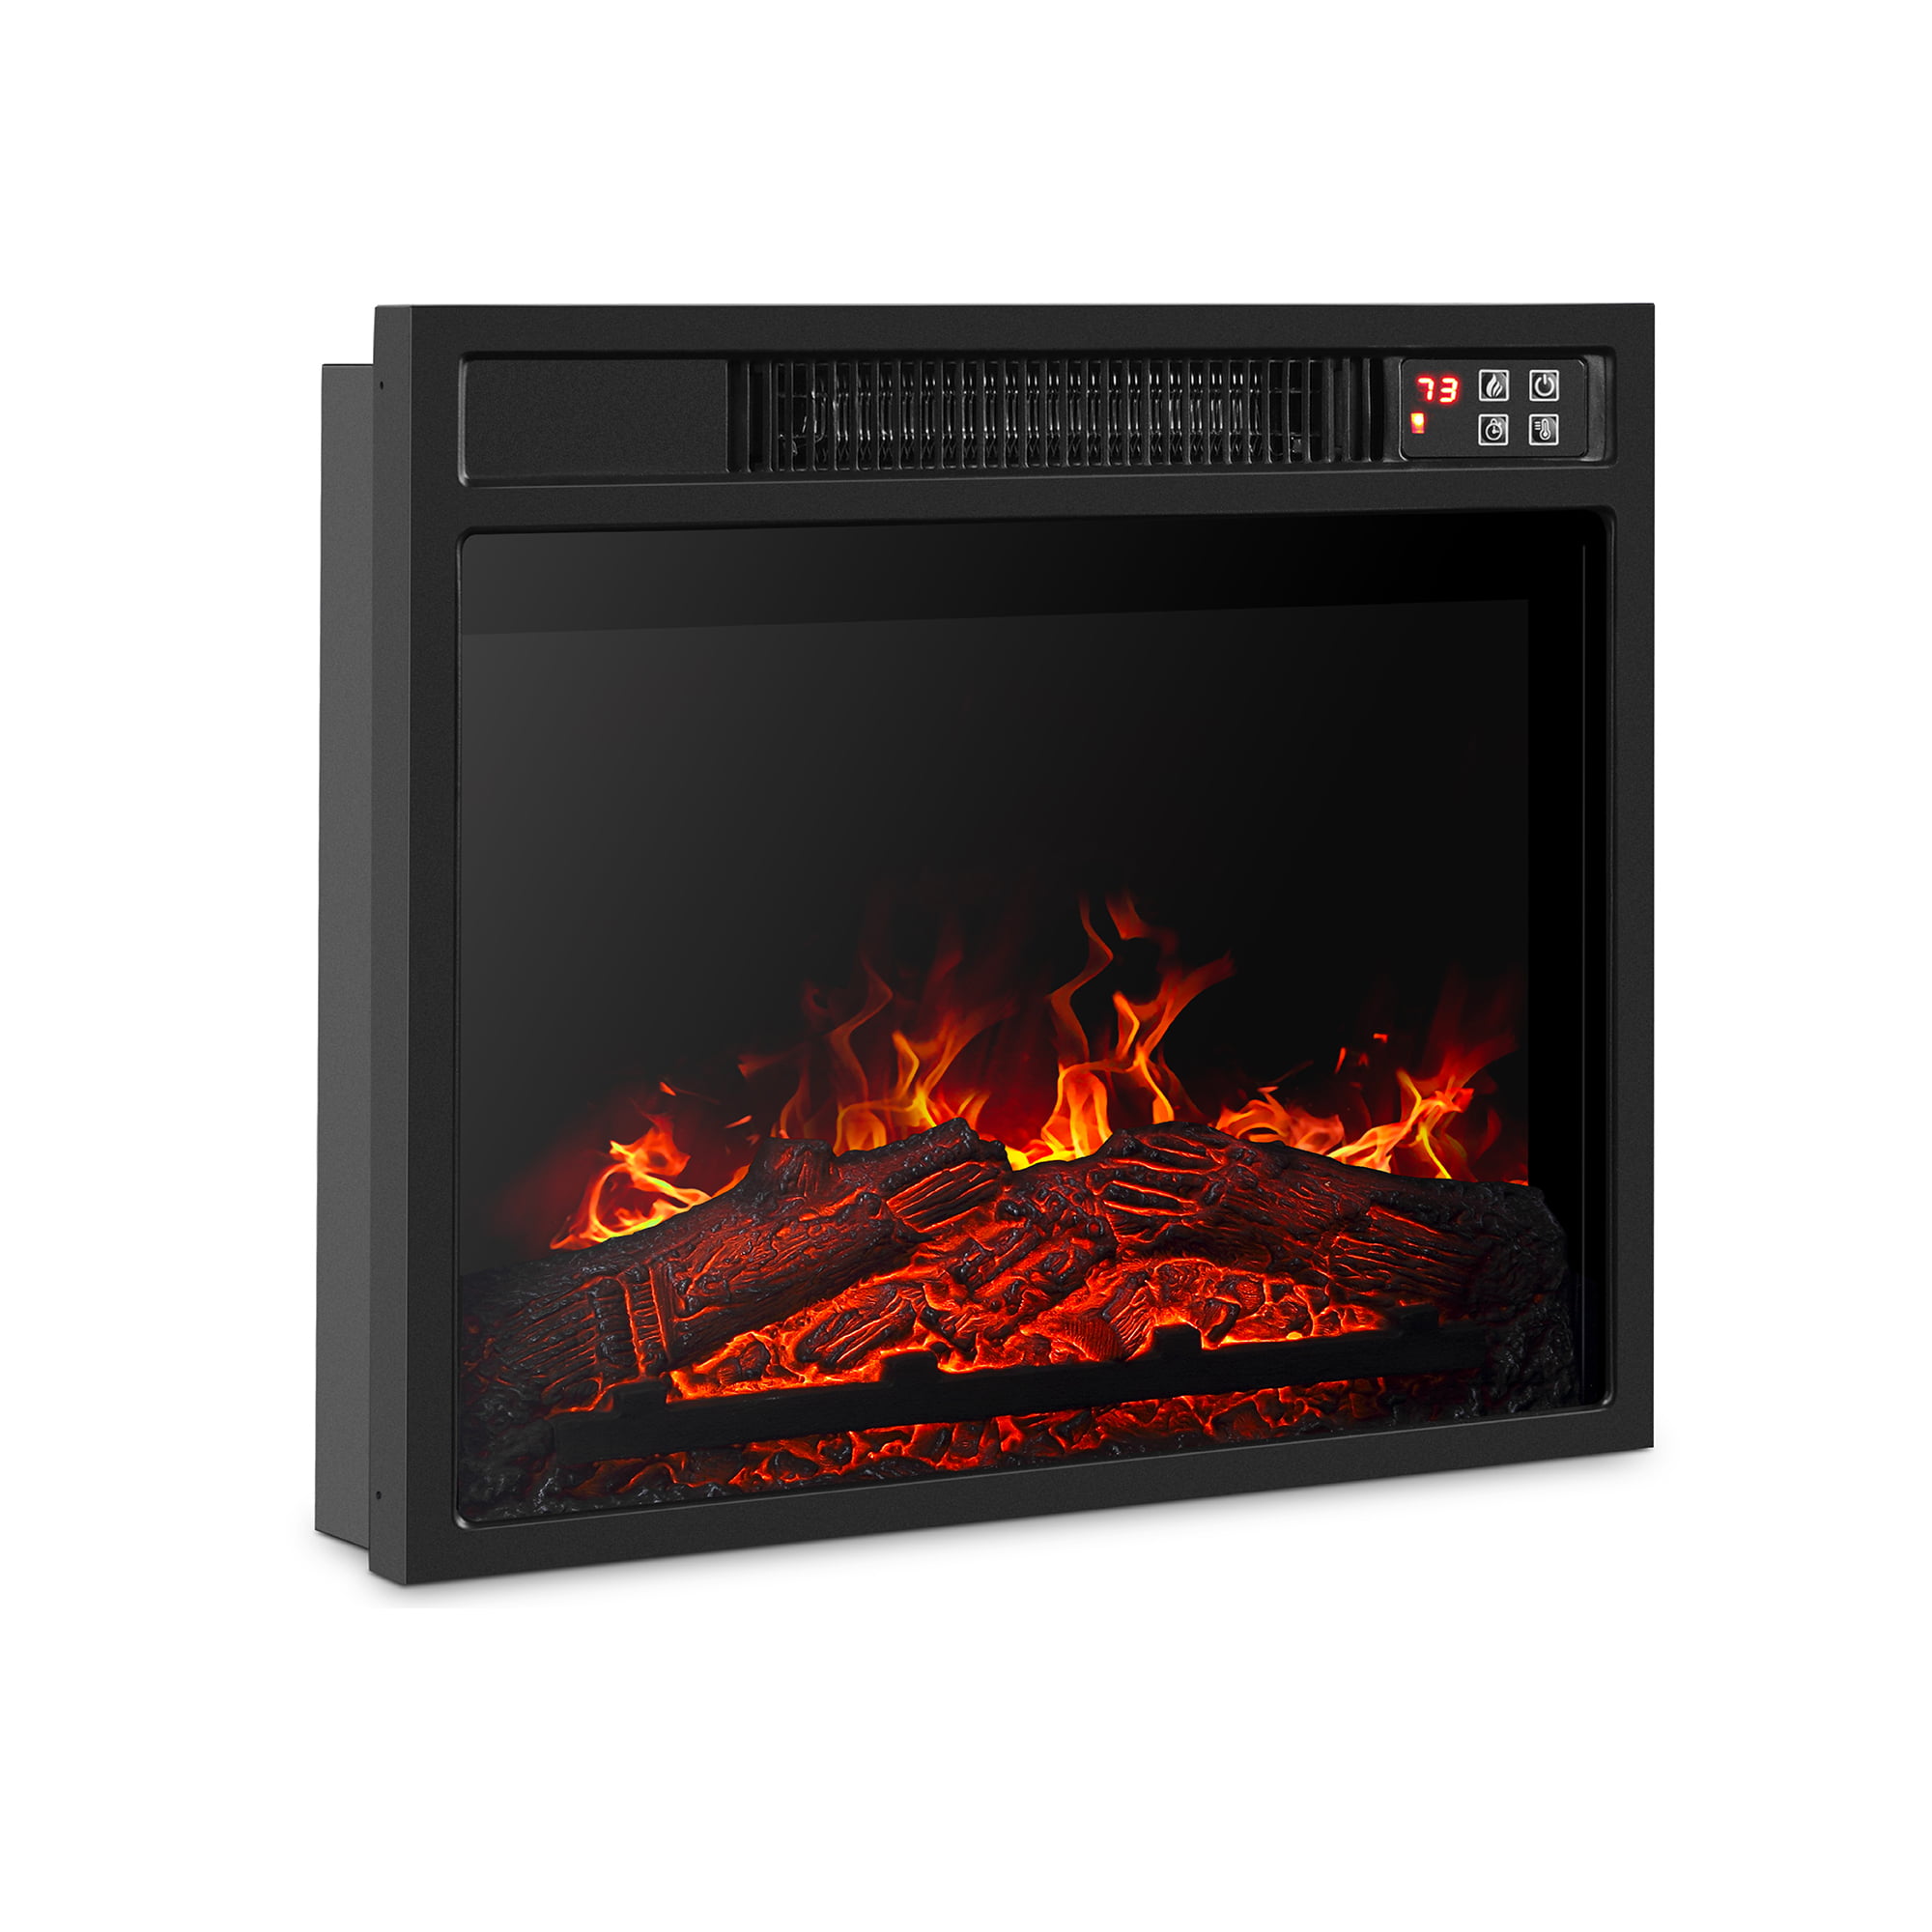 Black BELLEZE 18 Embedded Electric Fireplace Insert Remote Heater Glass View Adjustable Log Flame 1400W